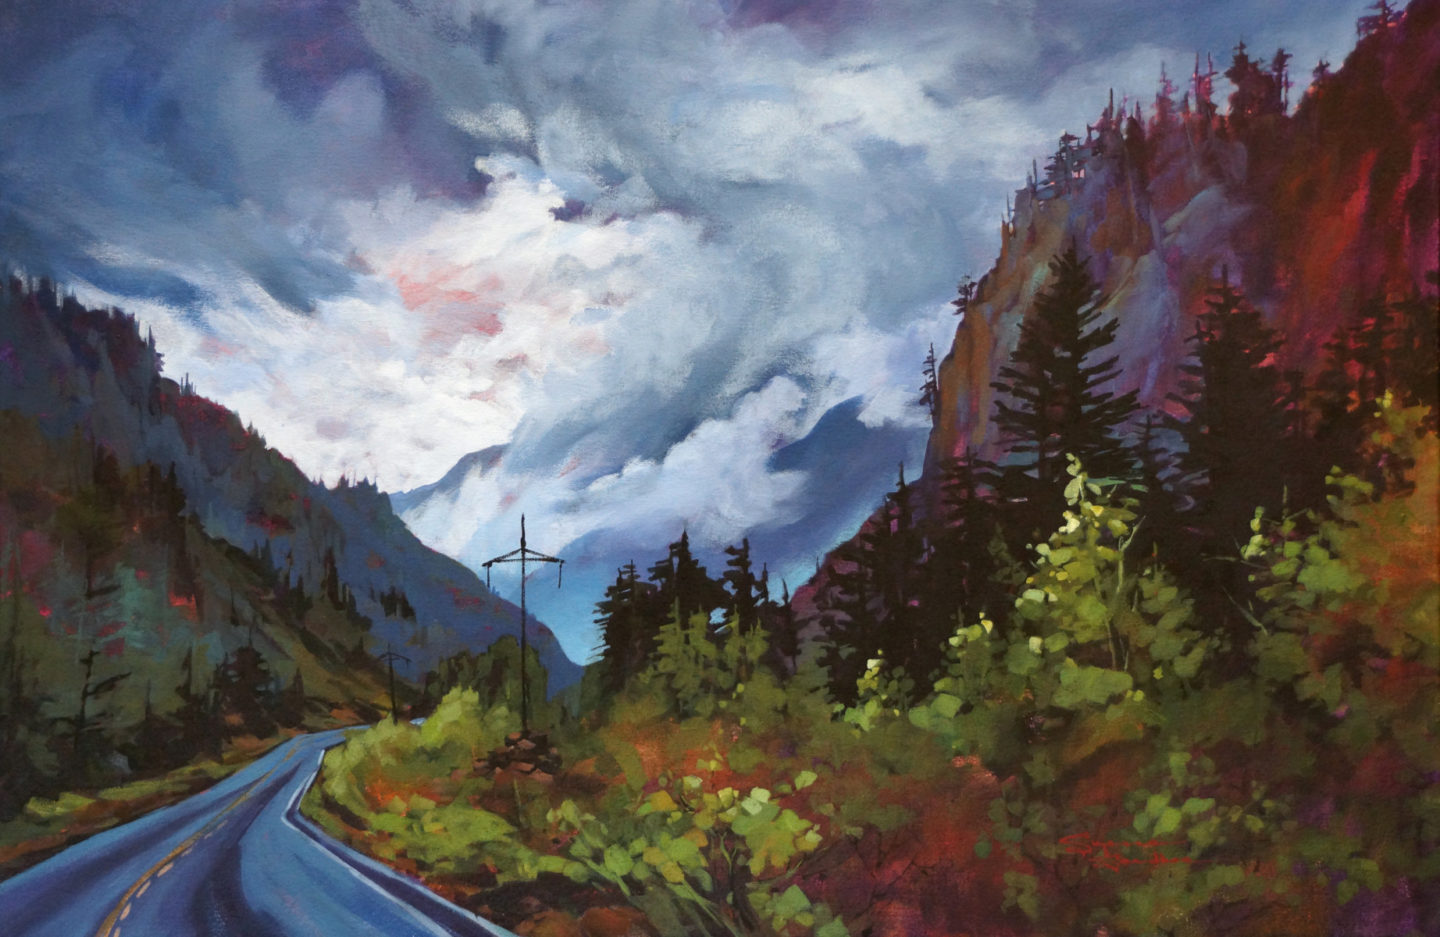 Clouds In The Valley, Stewart BC, 24x36, Acrylic, 2018 - 